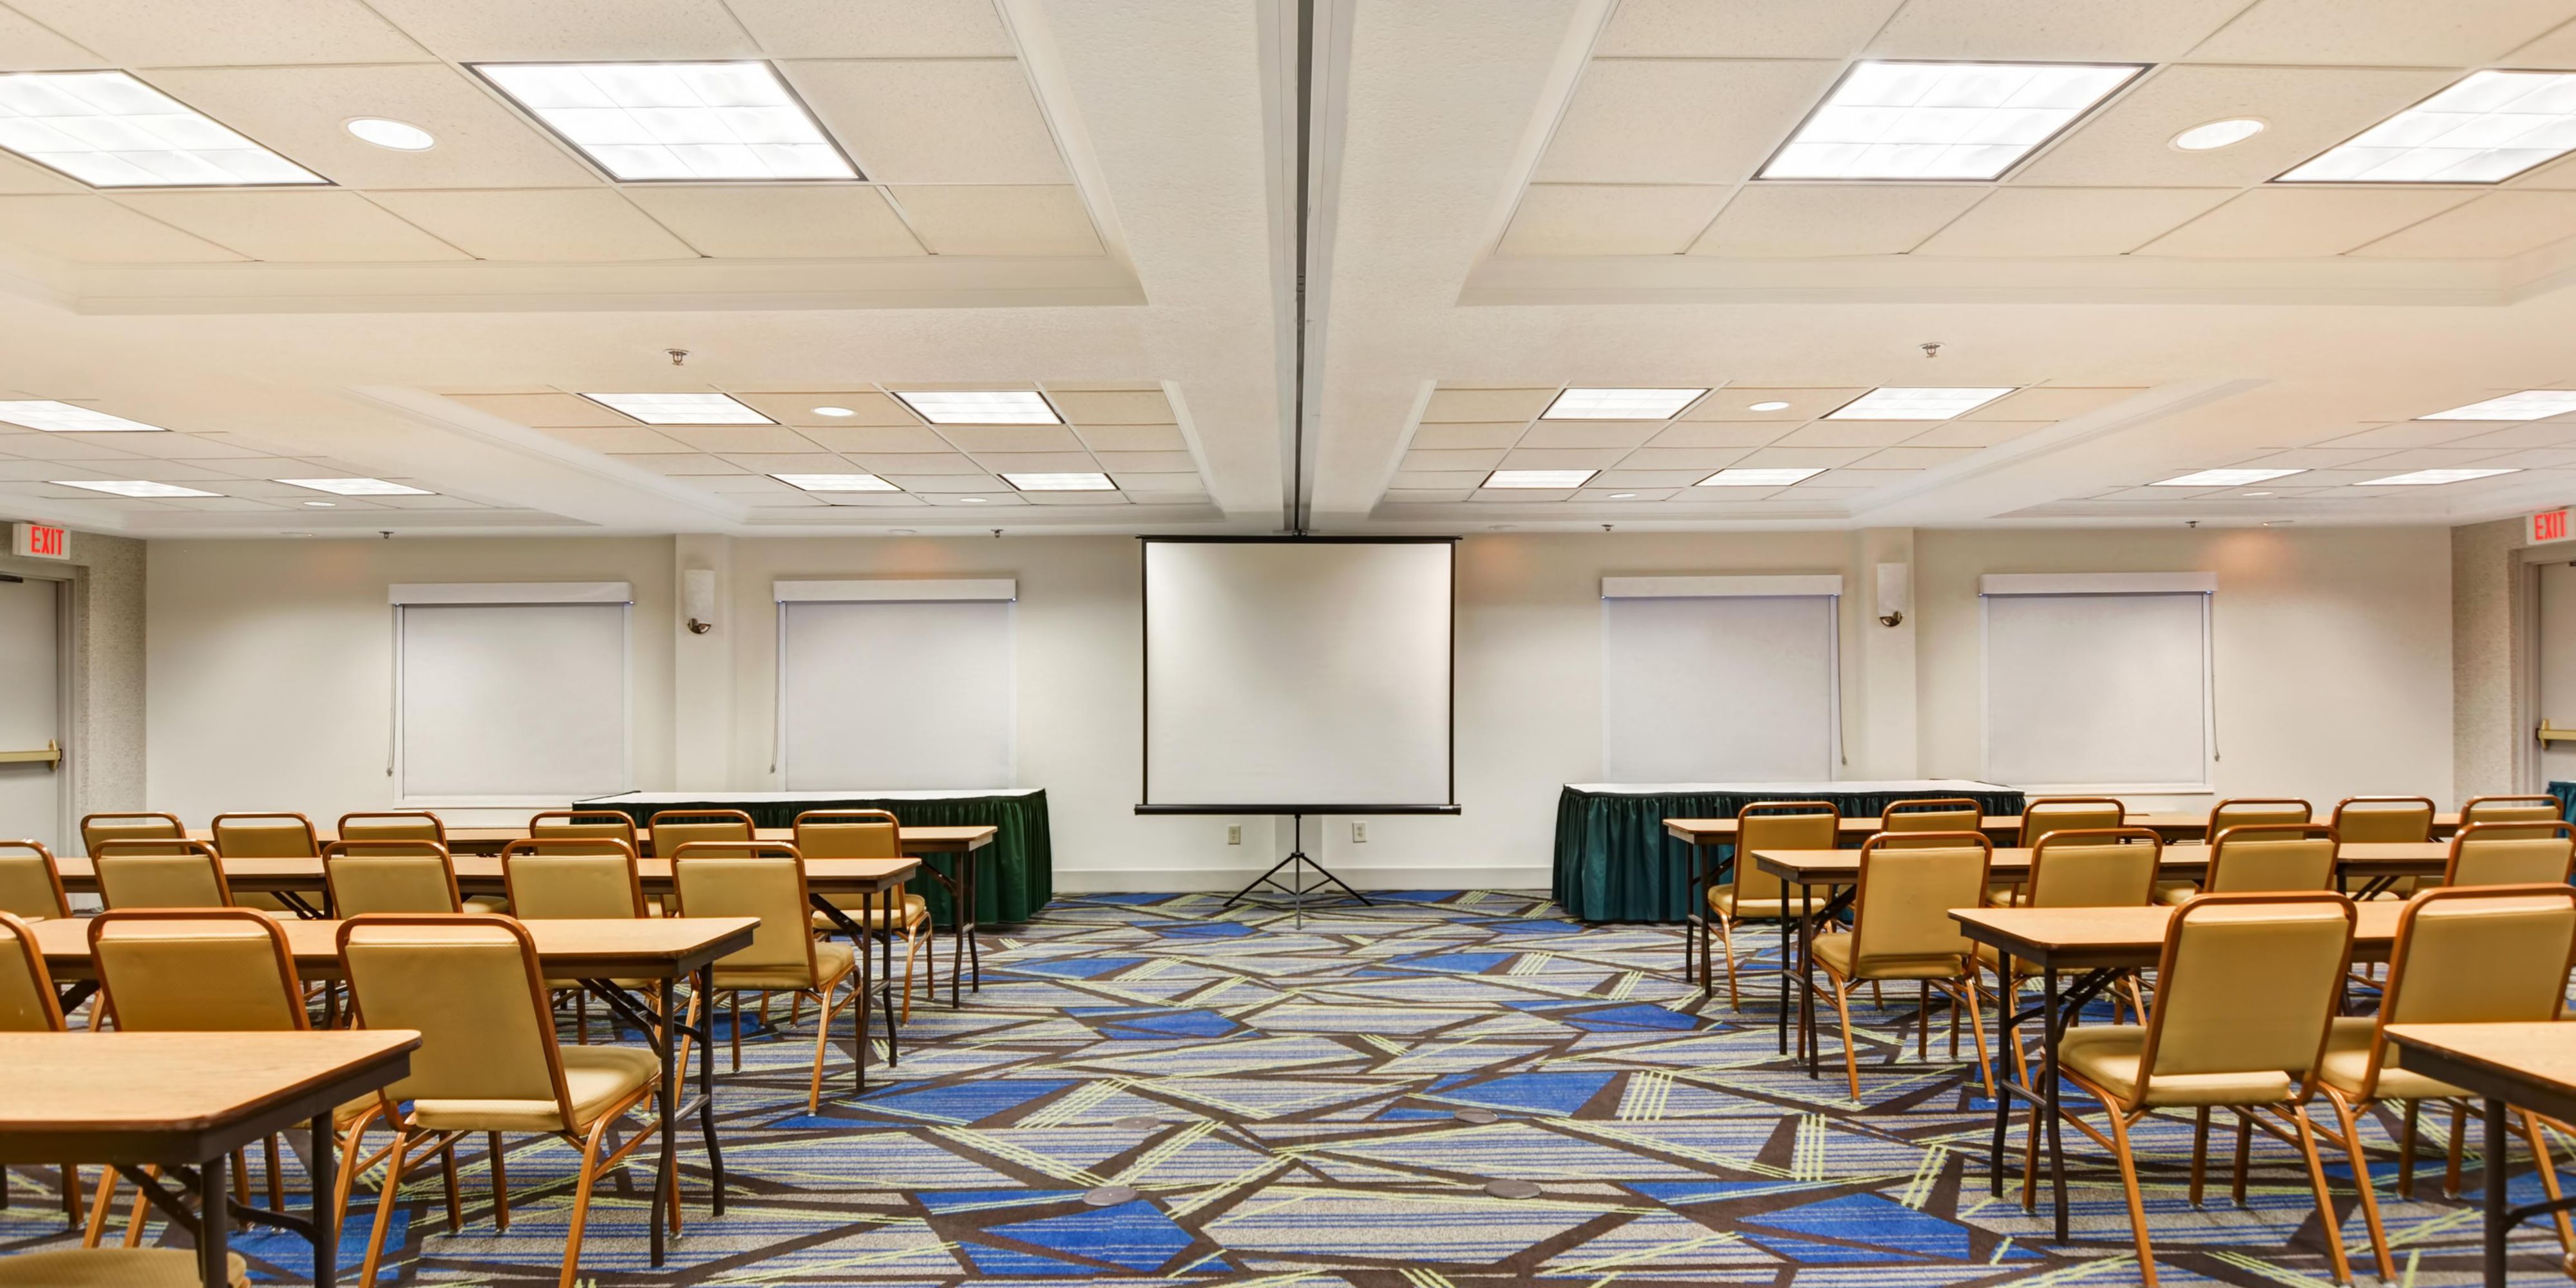 Our hotel offers 1612 sq. ft of flexible meeting space for your important meetings or casual get-togethers for up to 80 people. Contact our hotel directly for availability and group pricing, (262) 787-0700.